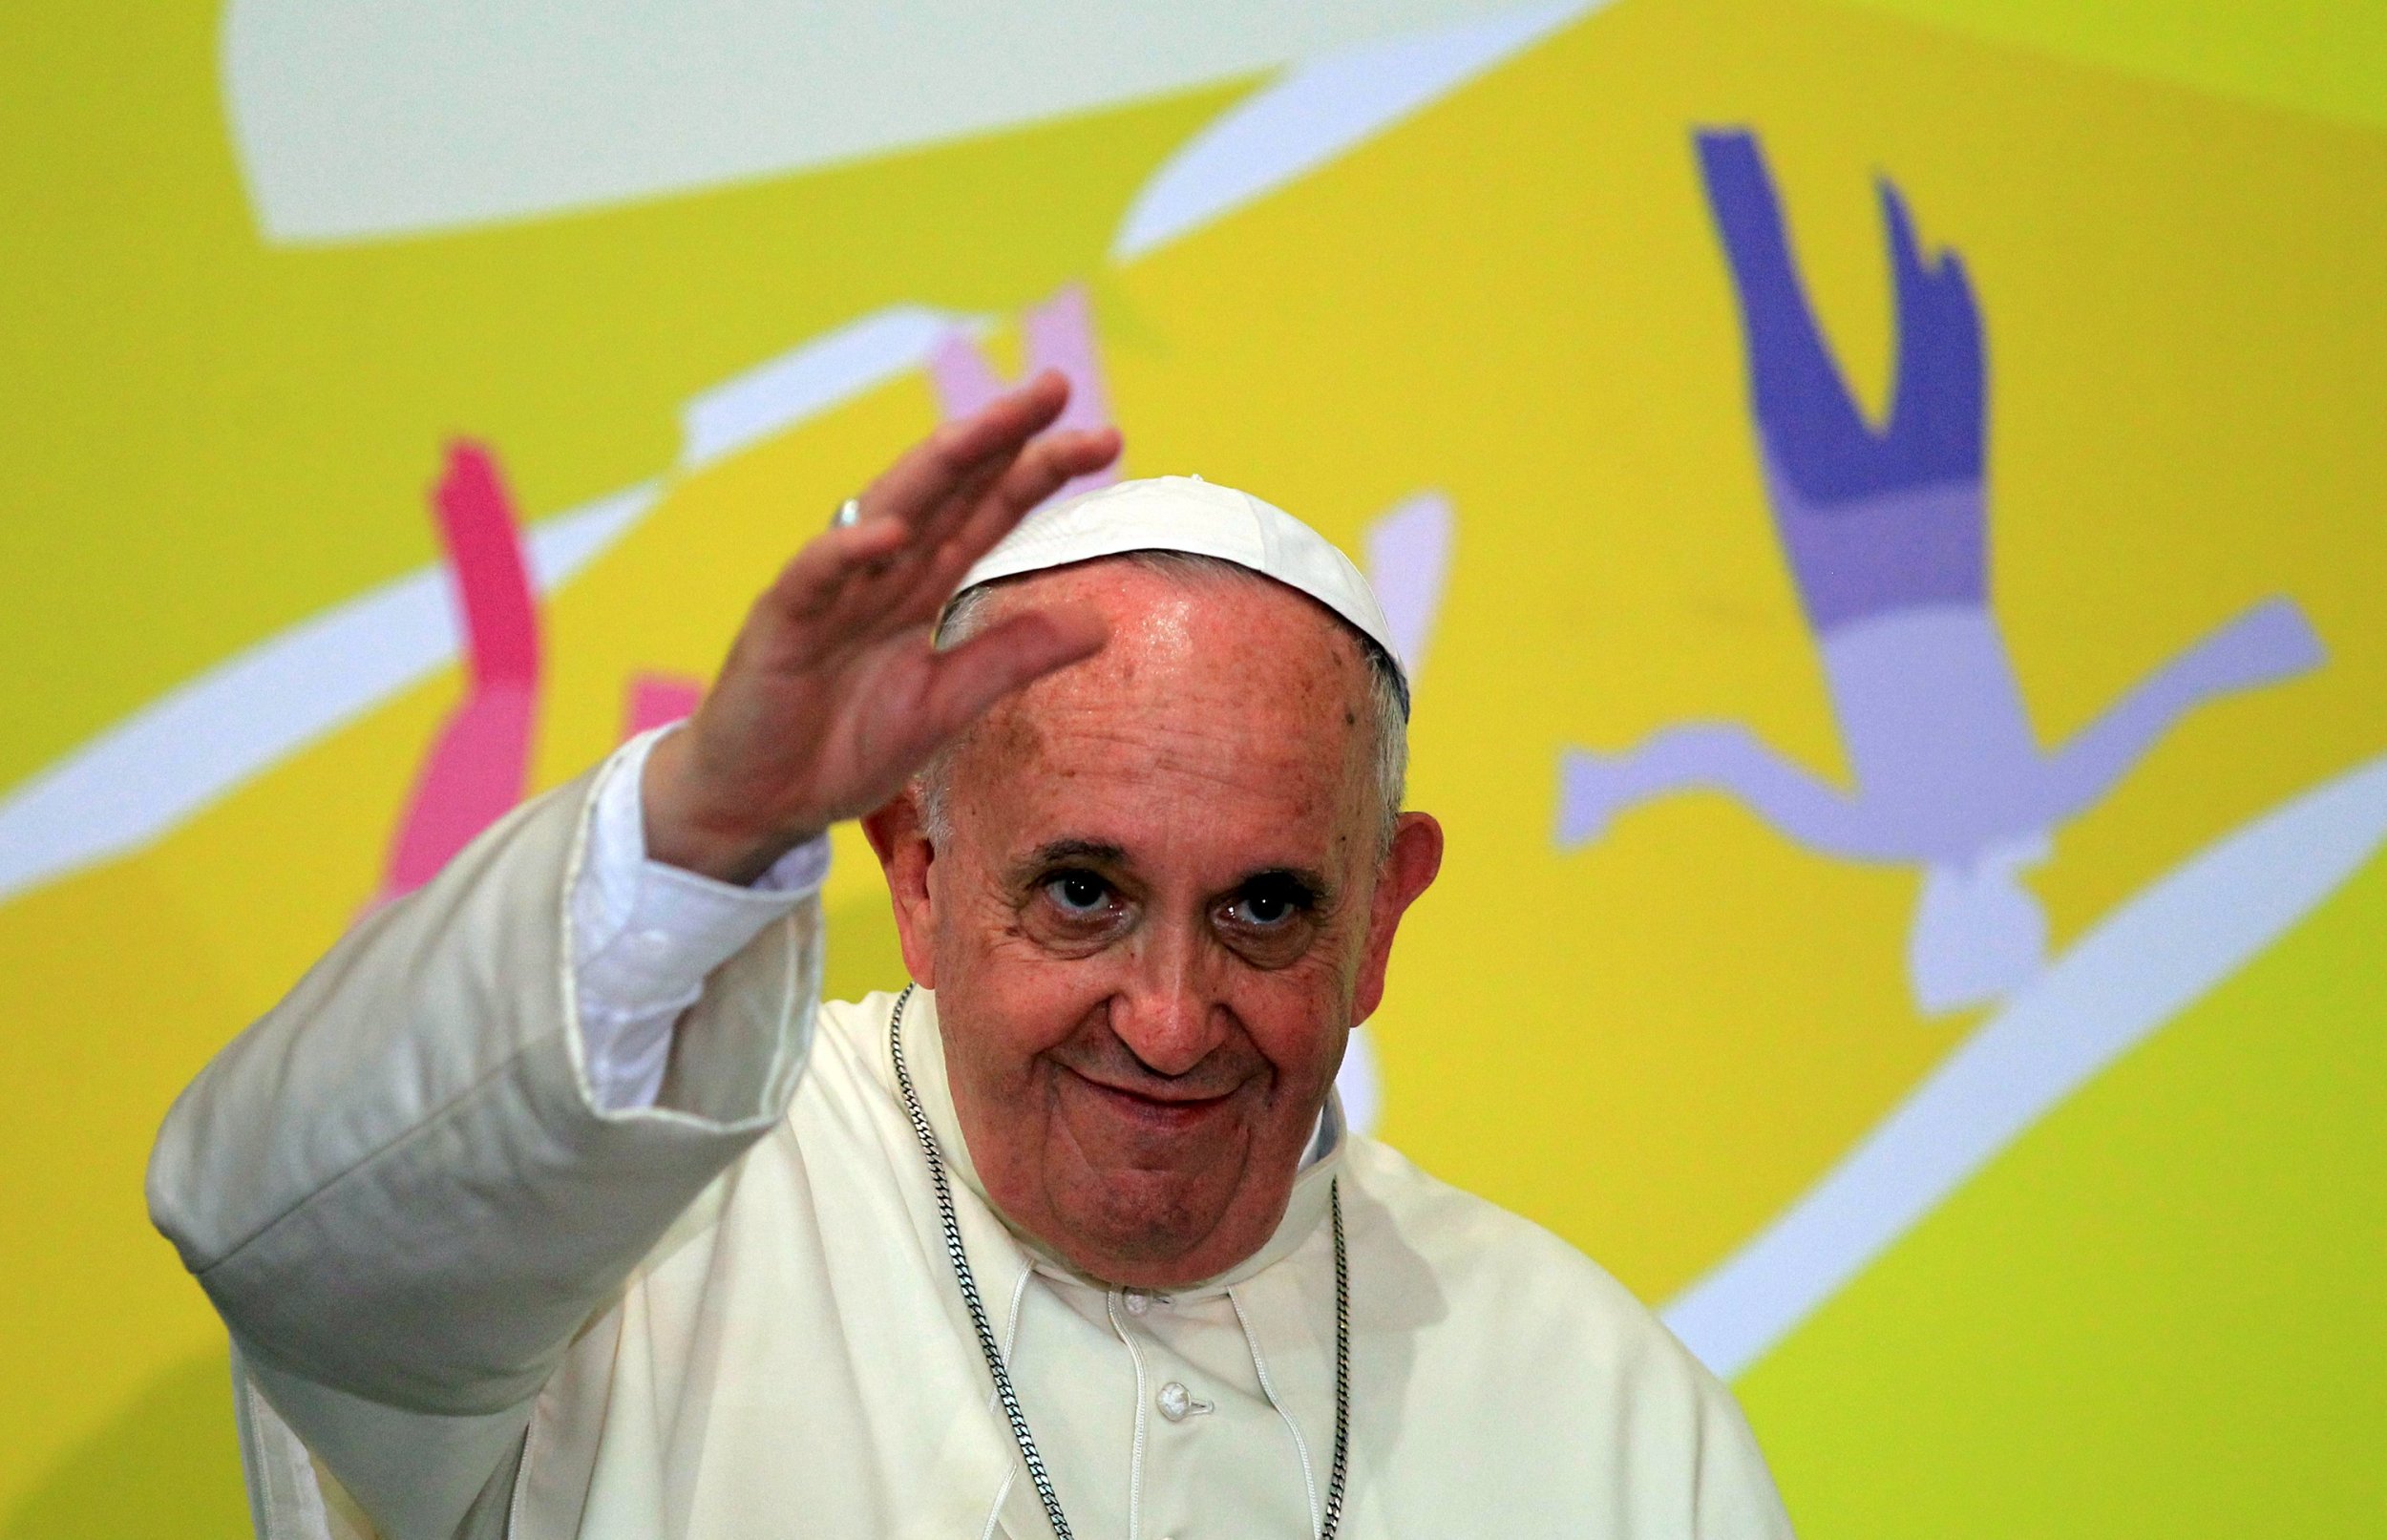 Pope Francis Climate Change Encyclical Divided Catholics, Church